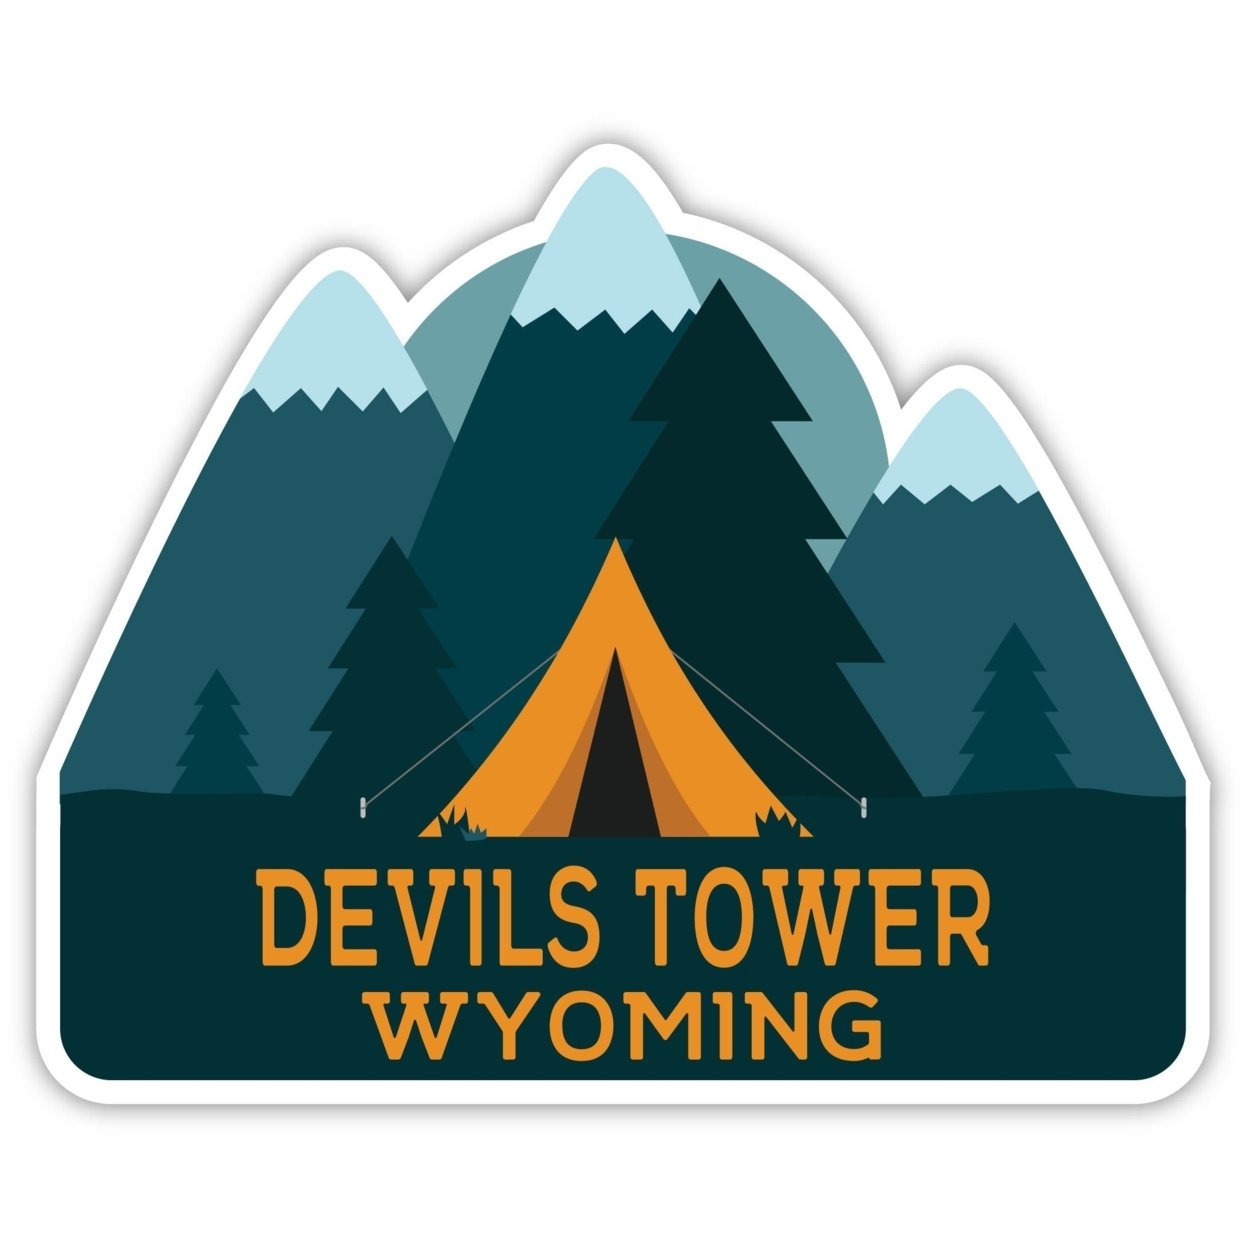 Devils Tower Wyoming Souvenir Decorative Stickers (Choose Theme And Size) - Single Unit, 6-Inch, Great Outdoors